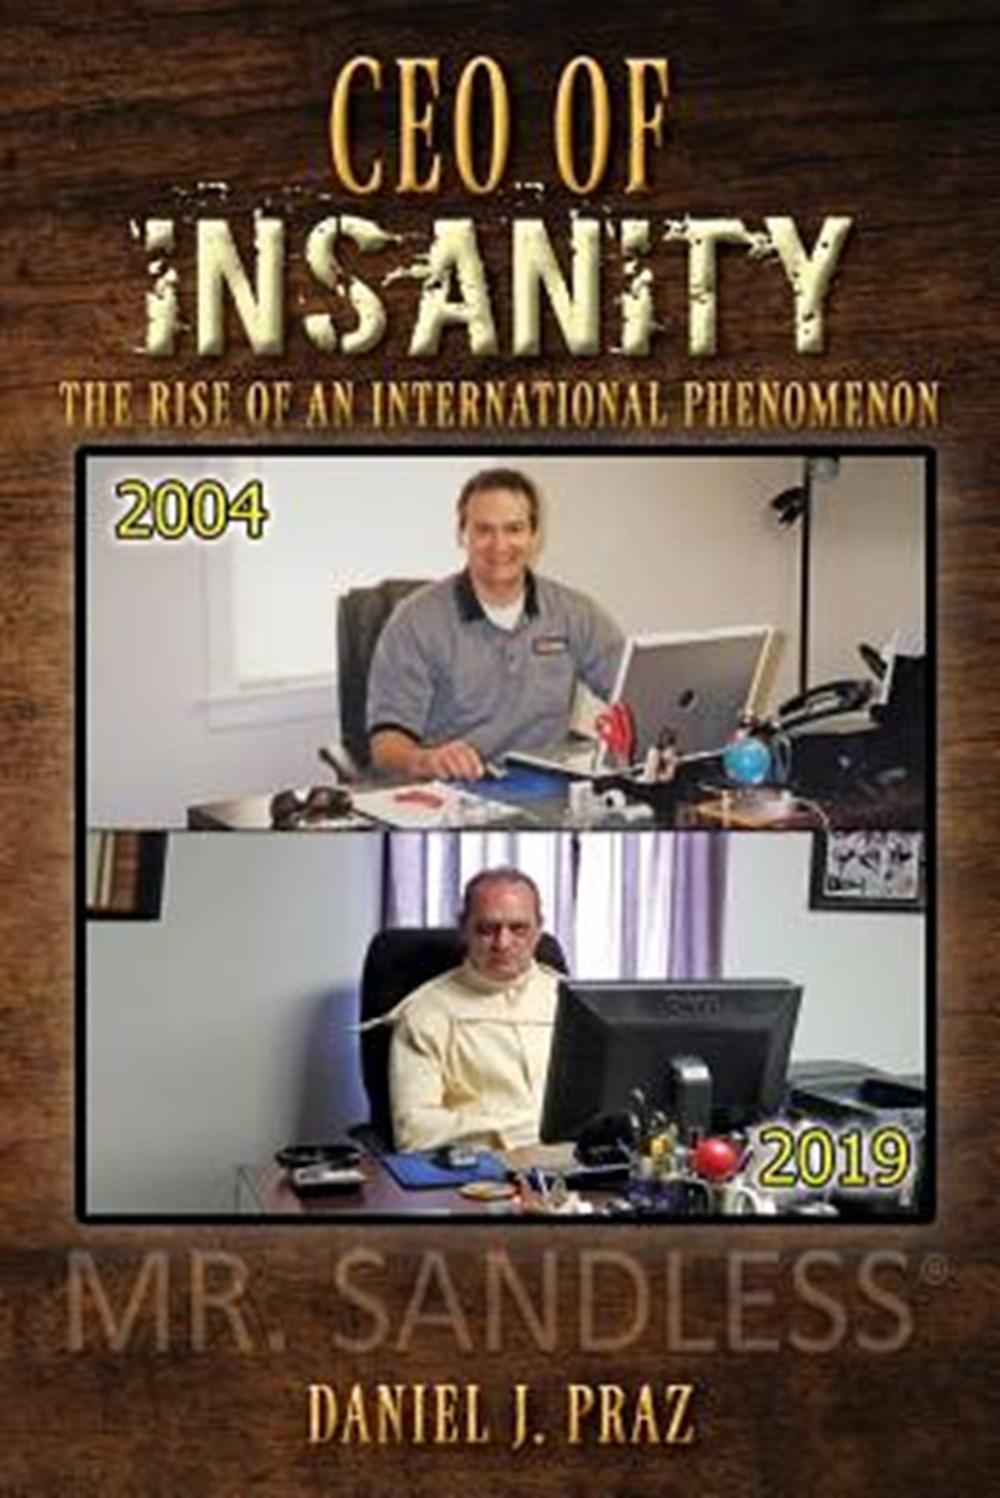 CEO of Insanity The Rise of an International Phenomenon